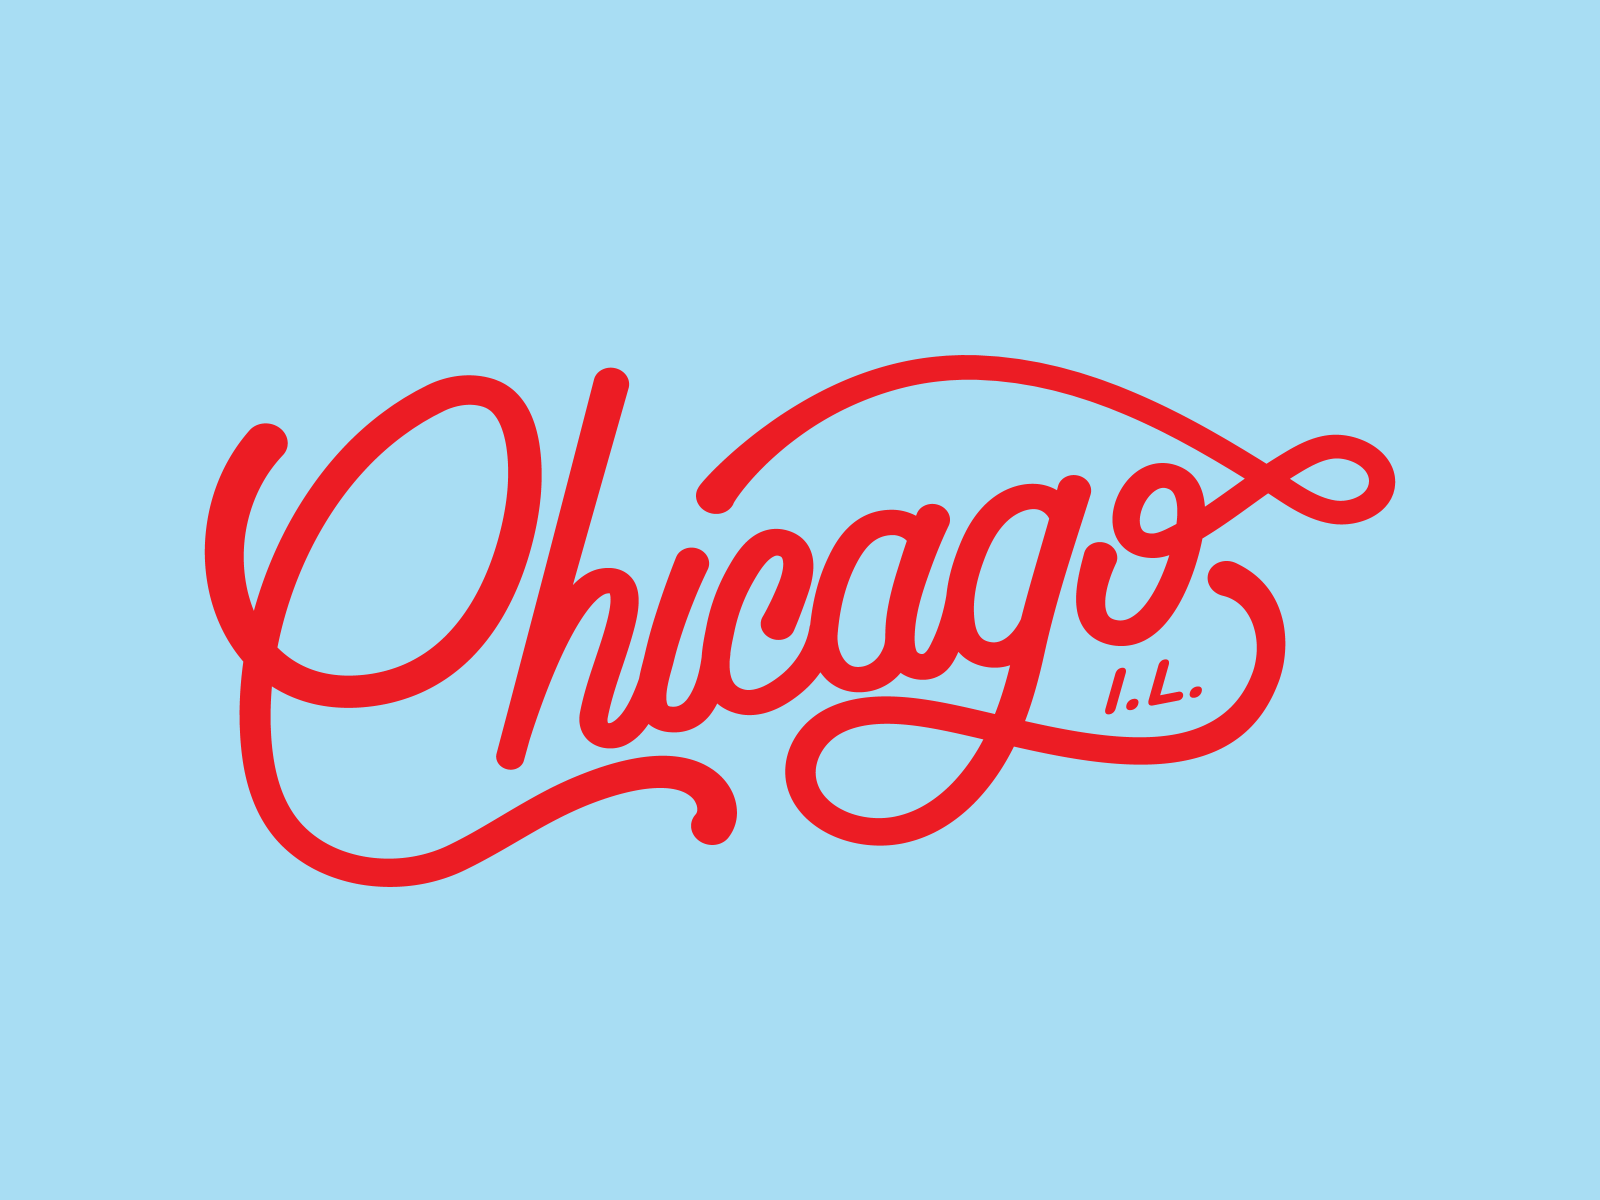 Chicago Lettering by David J Sorrell on Dribbble